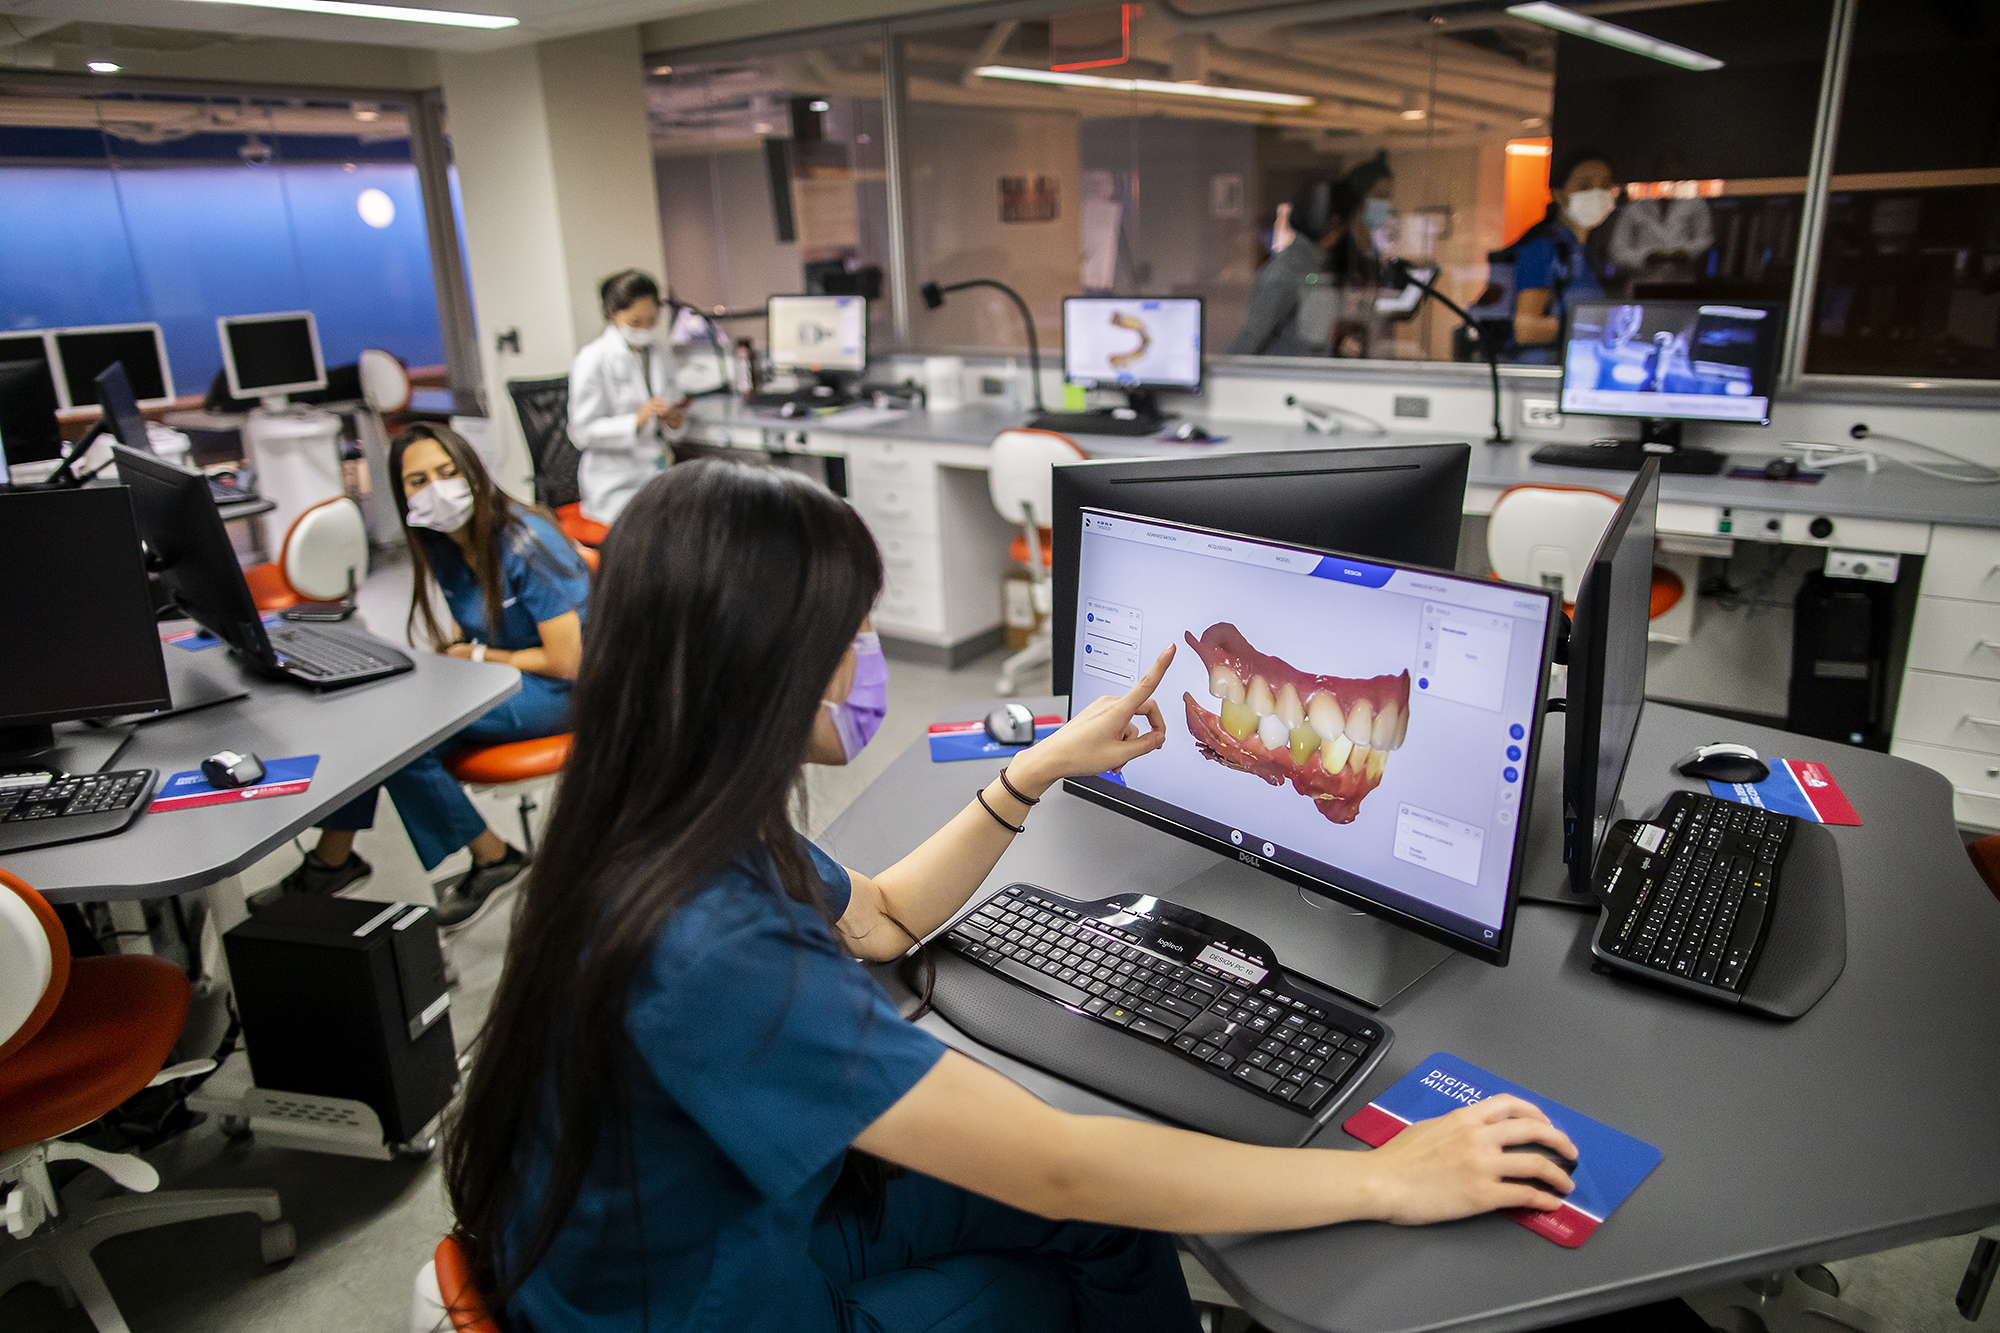 A person in a dental computer lab sits at a computer and points to a virtual model of a mouth and teeth